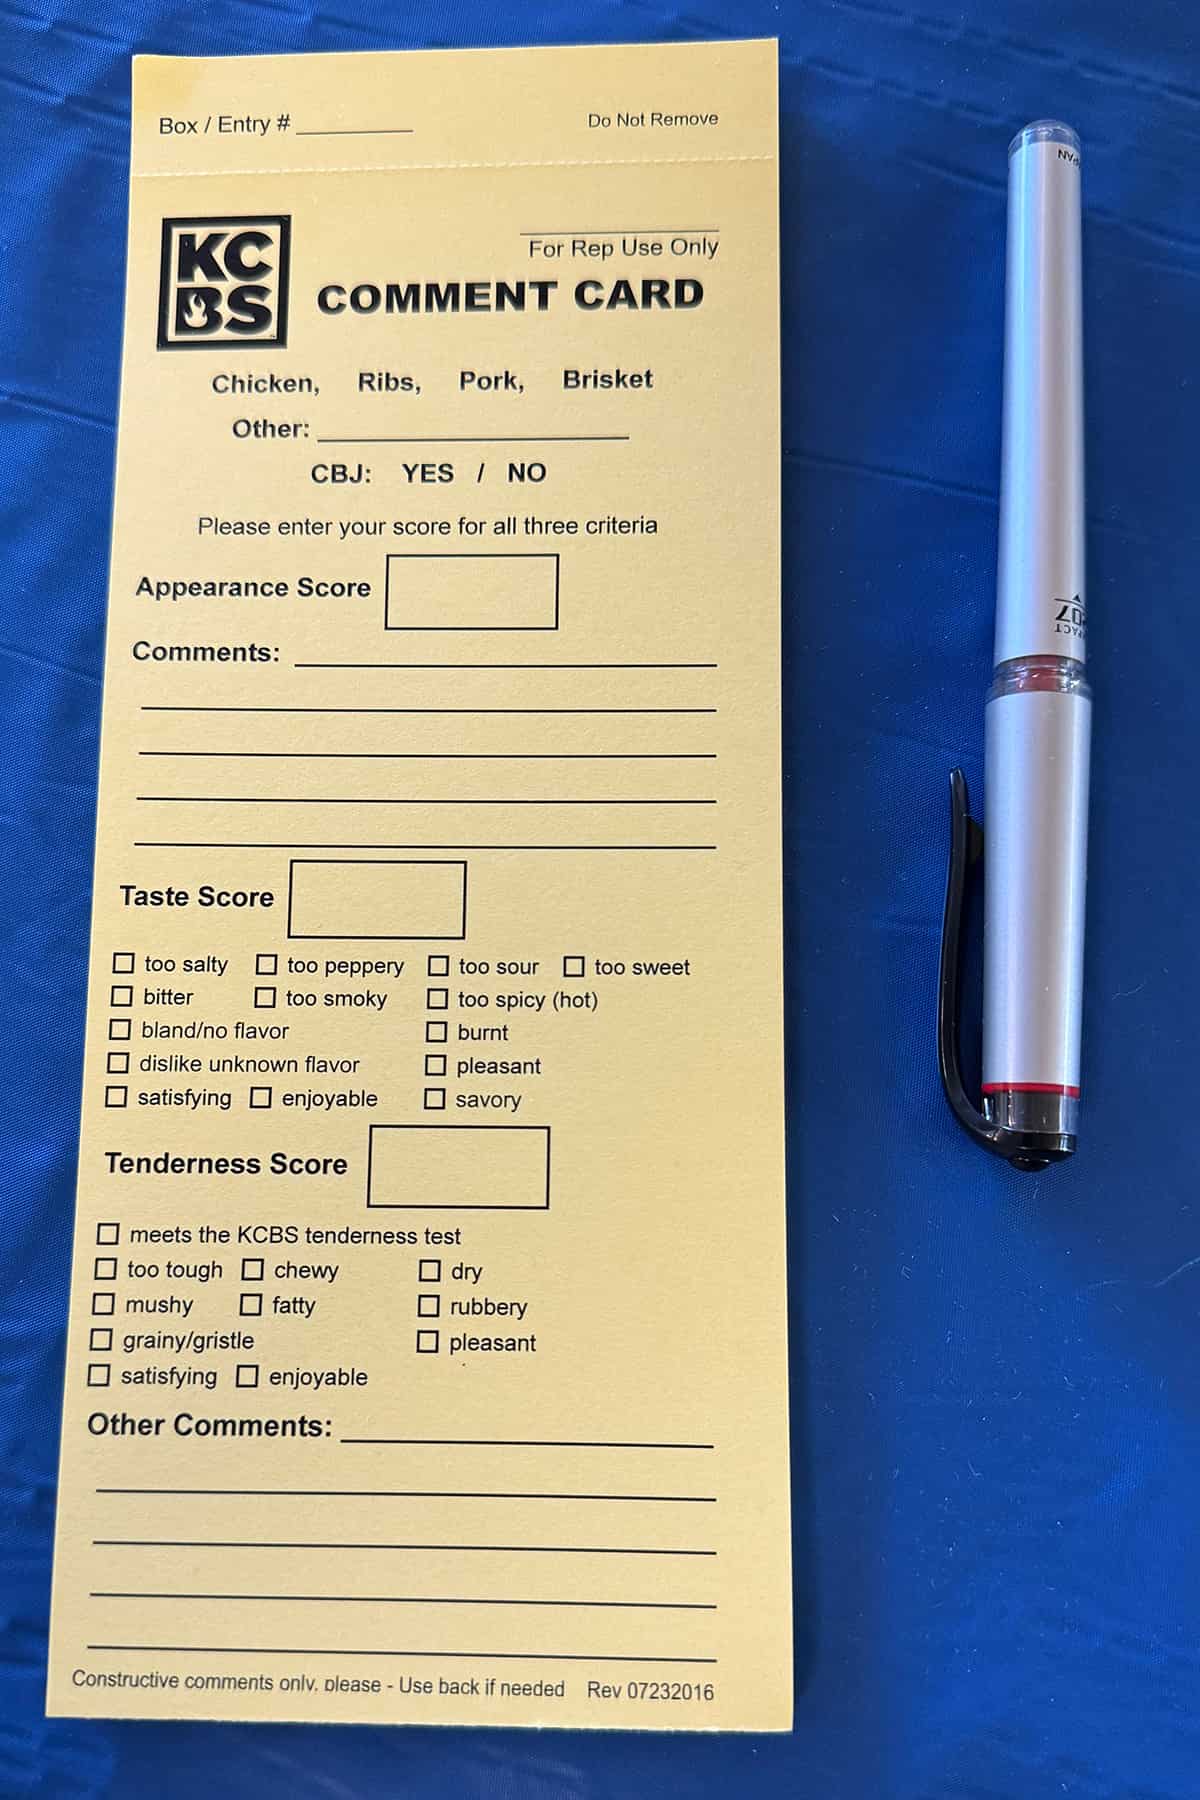 KCBS Comment Card.